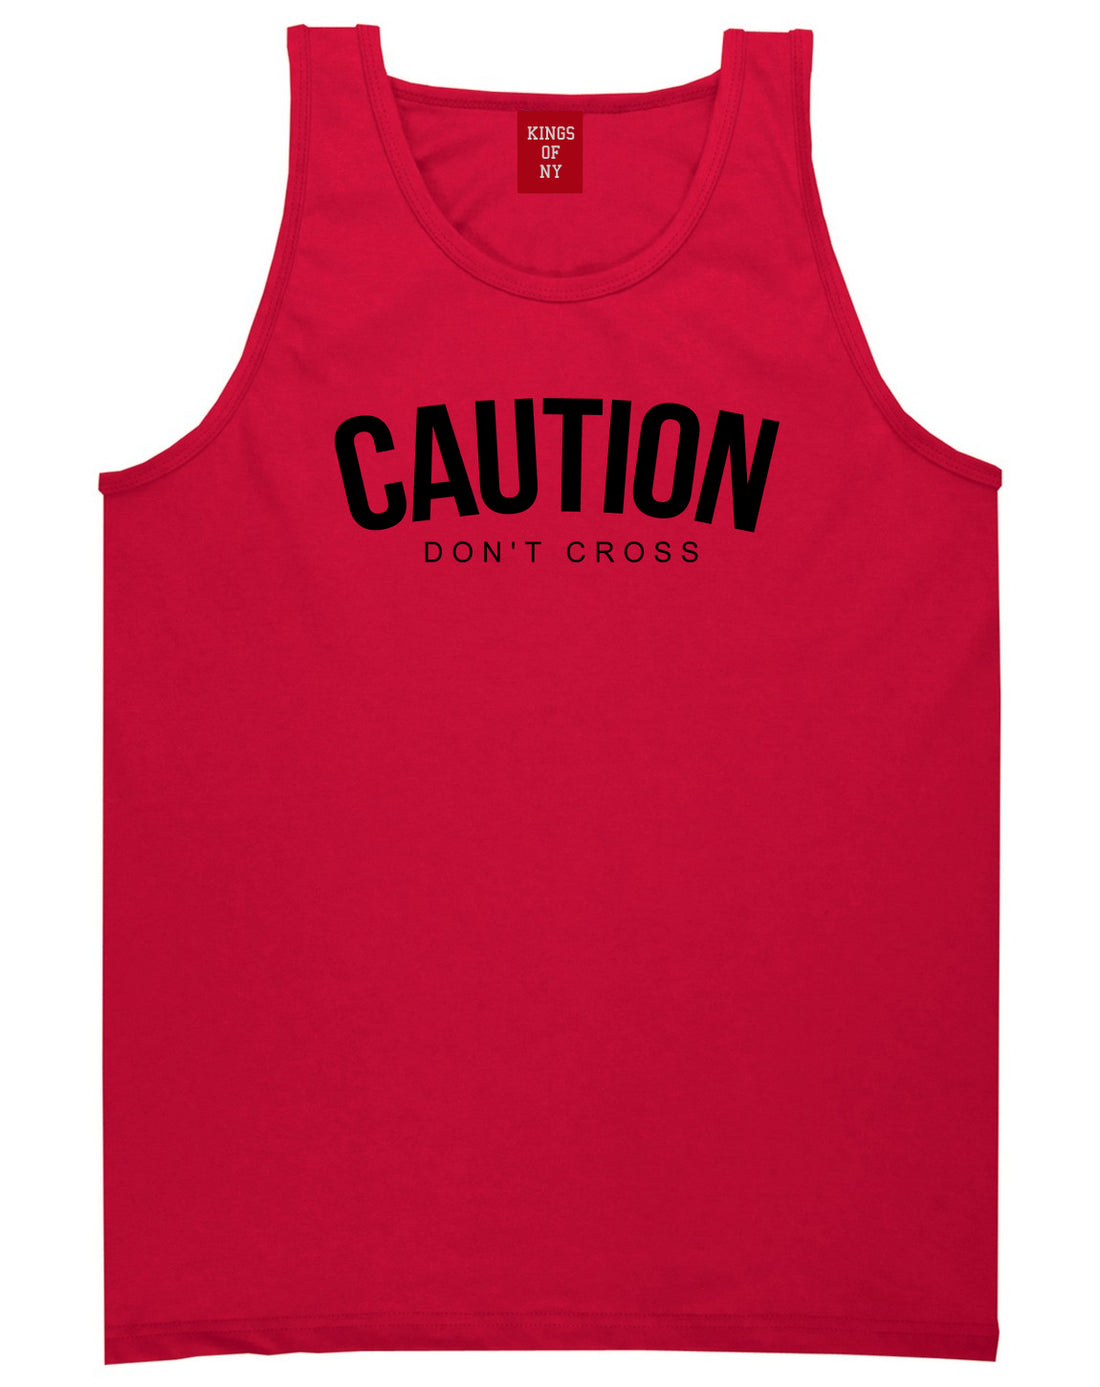 Caution Dont Cross Mens Tank Top Shirt Red by Kings Of NY